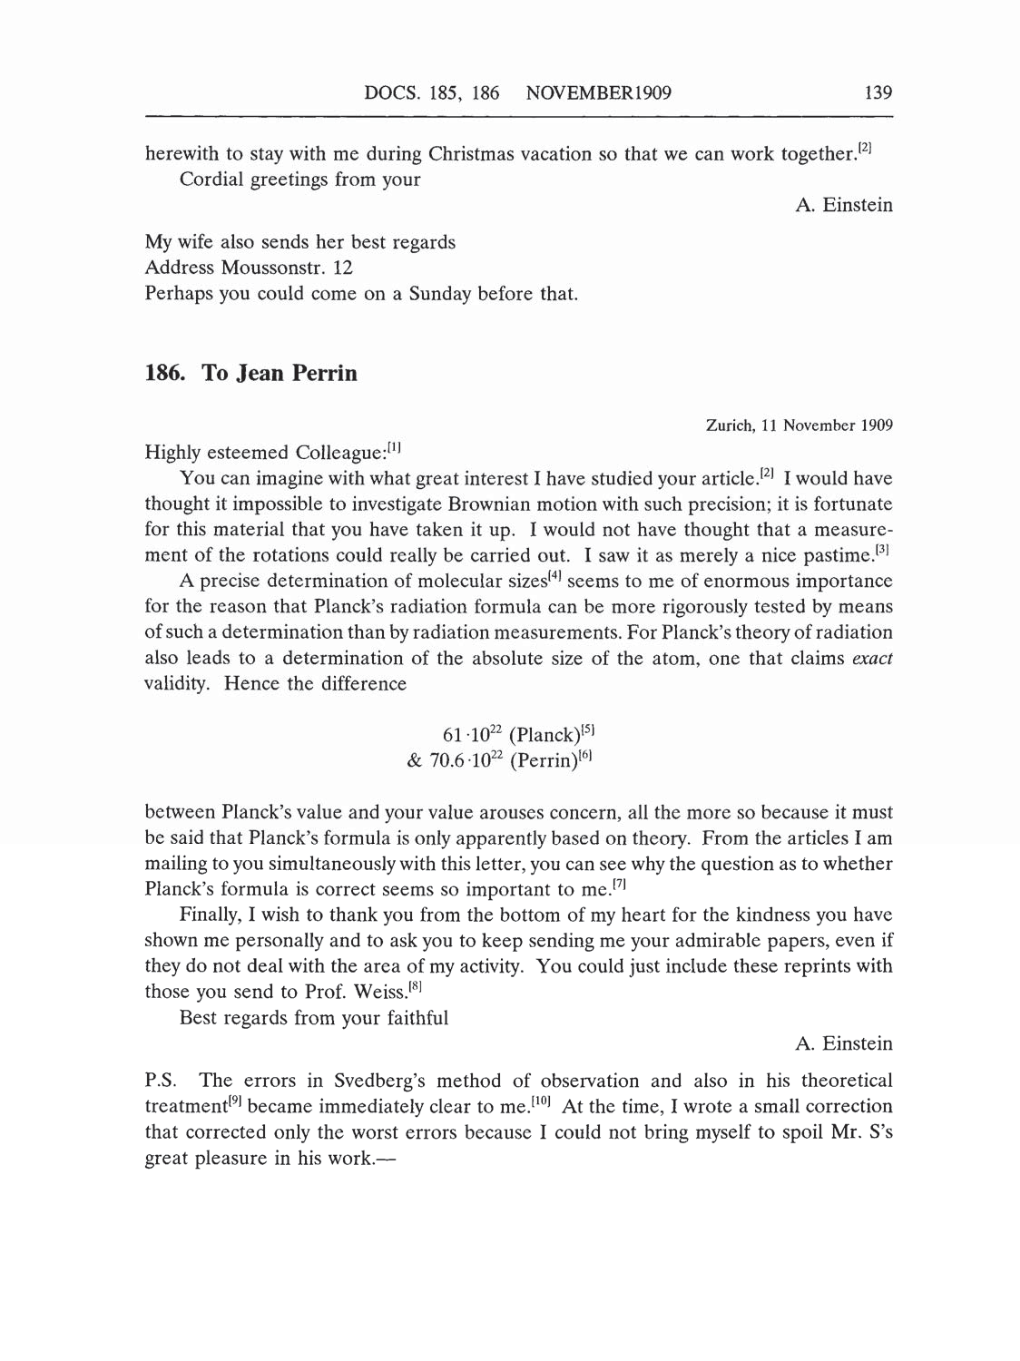 Volume 5: The Swiss Years: Correspondence, 1902-1914 (English translation supplement) page 139